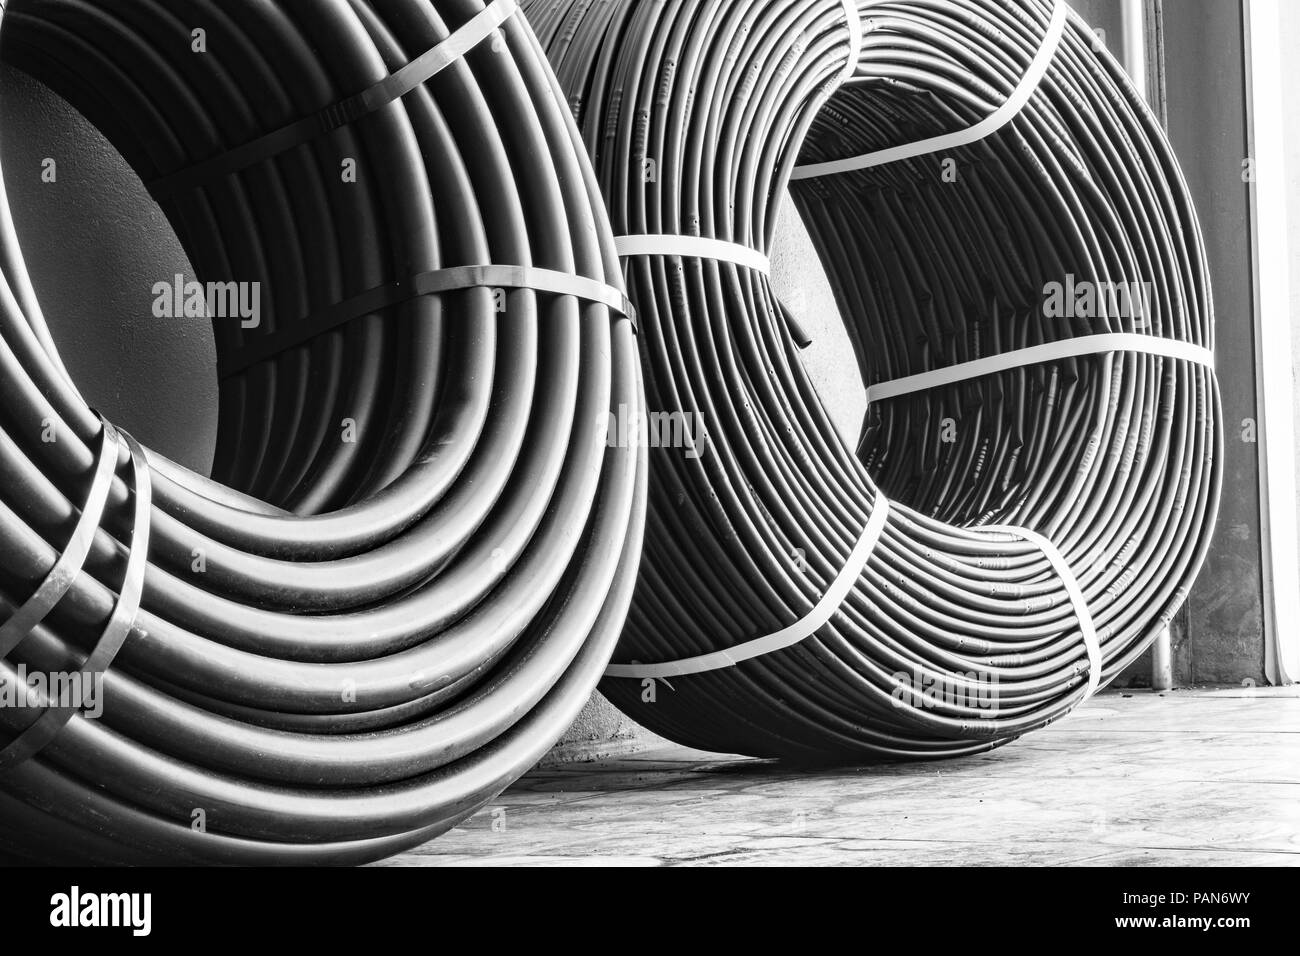 Two rolls of Drip Irrigation Hoses used for efficient water saving system for agricultural crops. Stock Photo